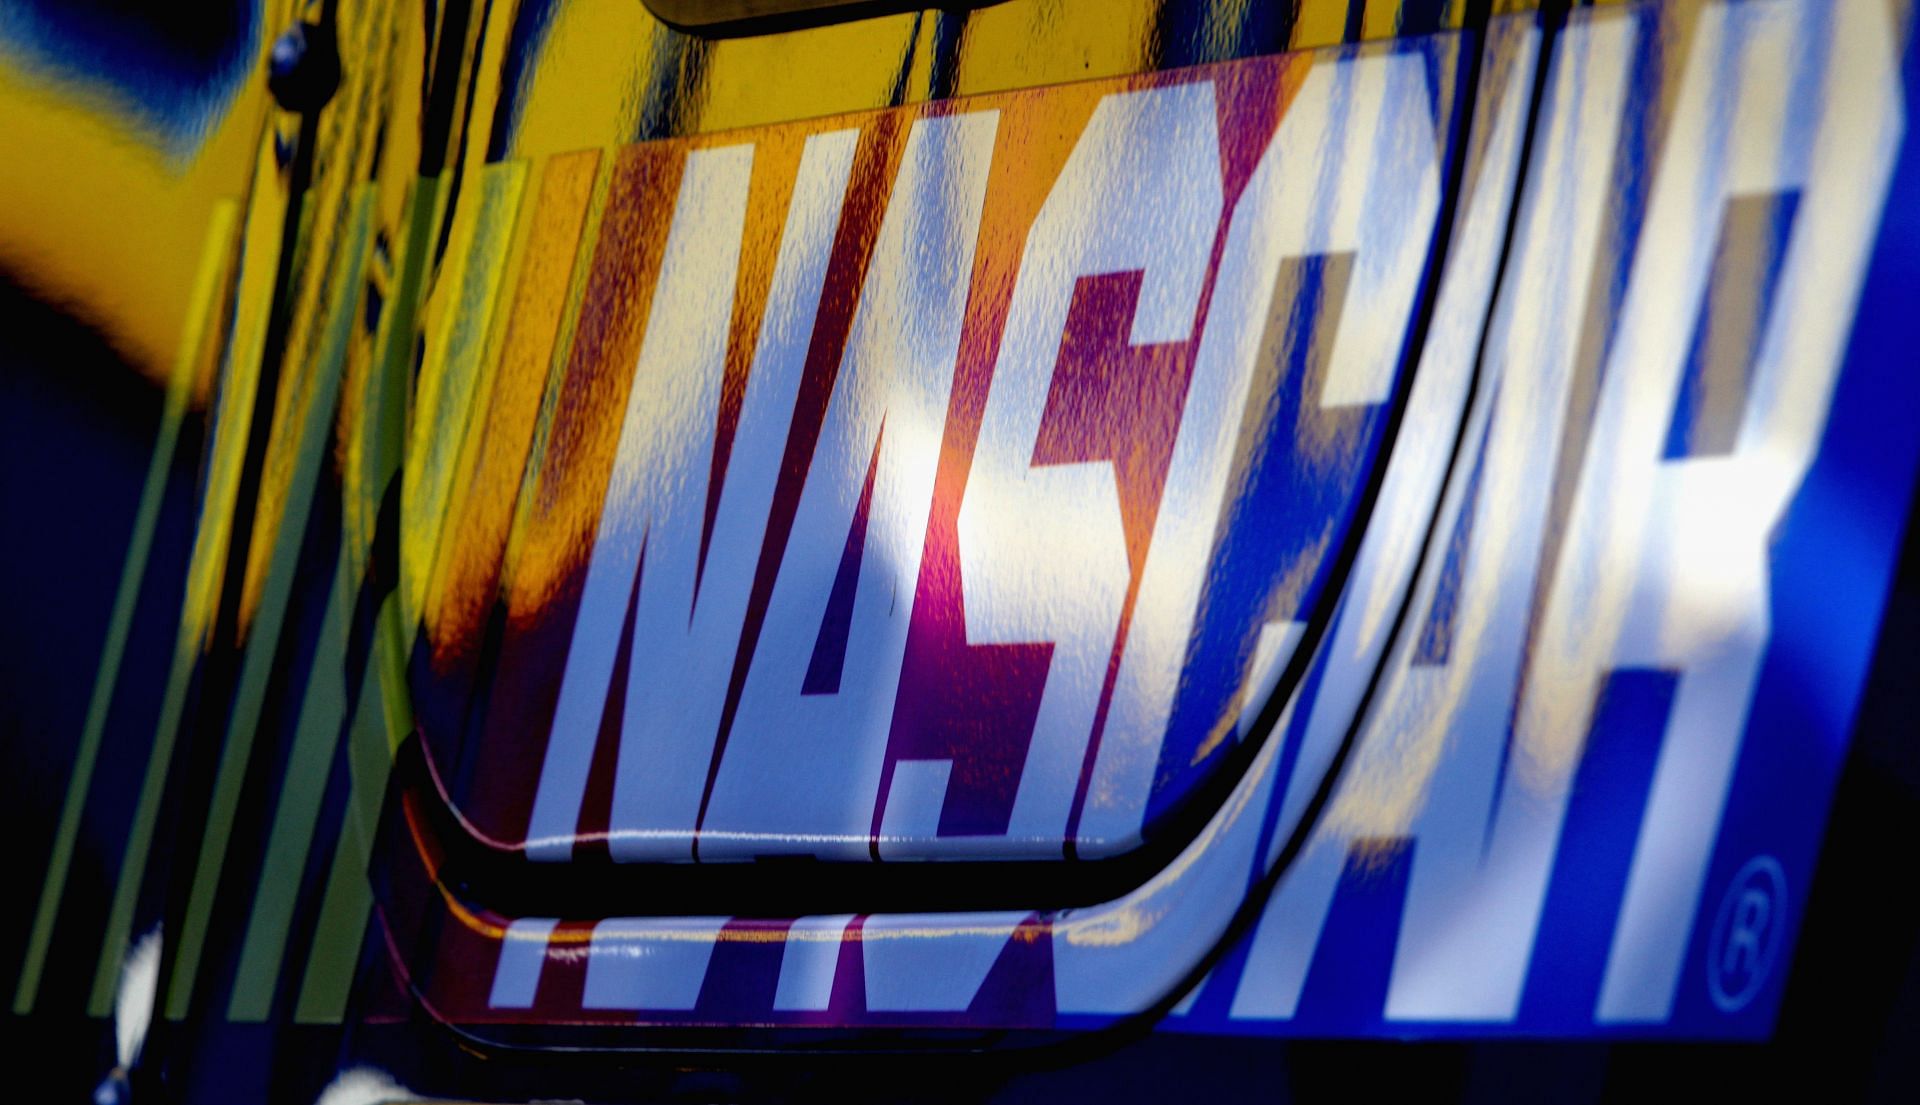 View of the NASCAR logo during practice for the NASCAR Sprint Cup Series Food City 500 at Bristol Motor Speedway (Photo by Jerry Markland/Getty Images)